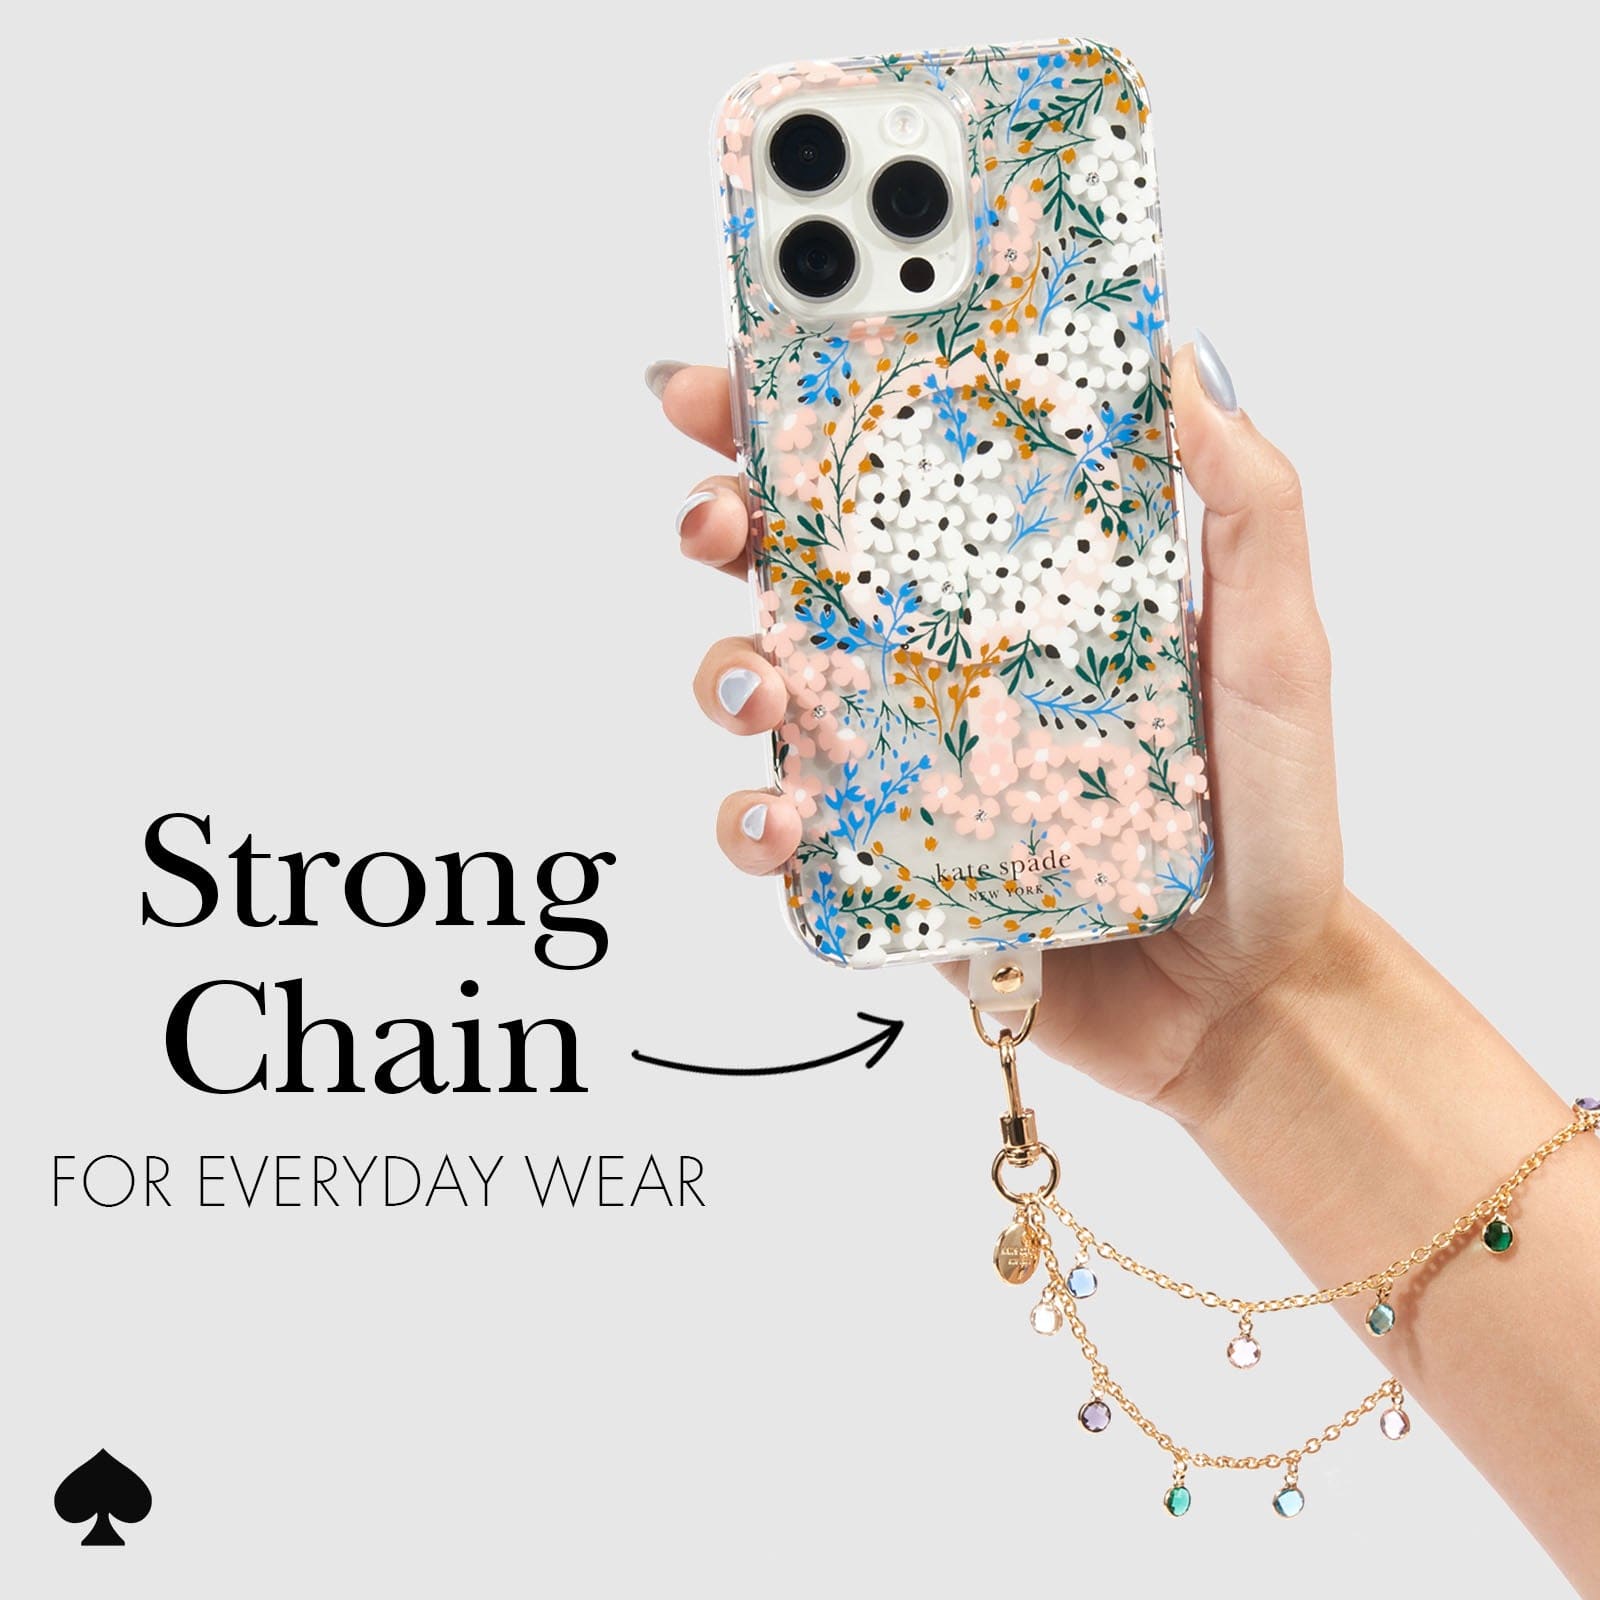 STRONG CHAIN FOR EVERYDAY WEAR